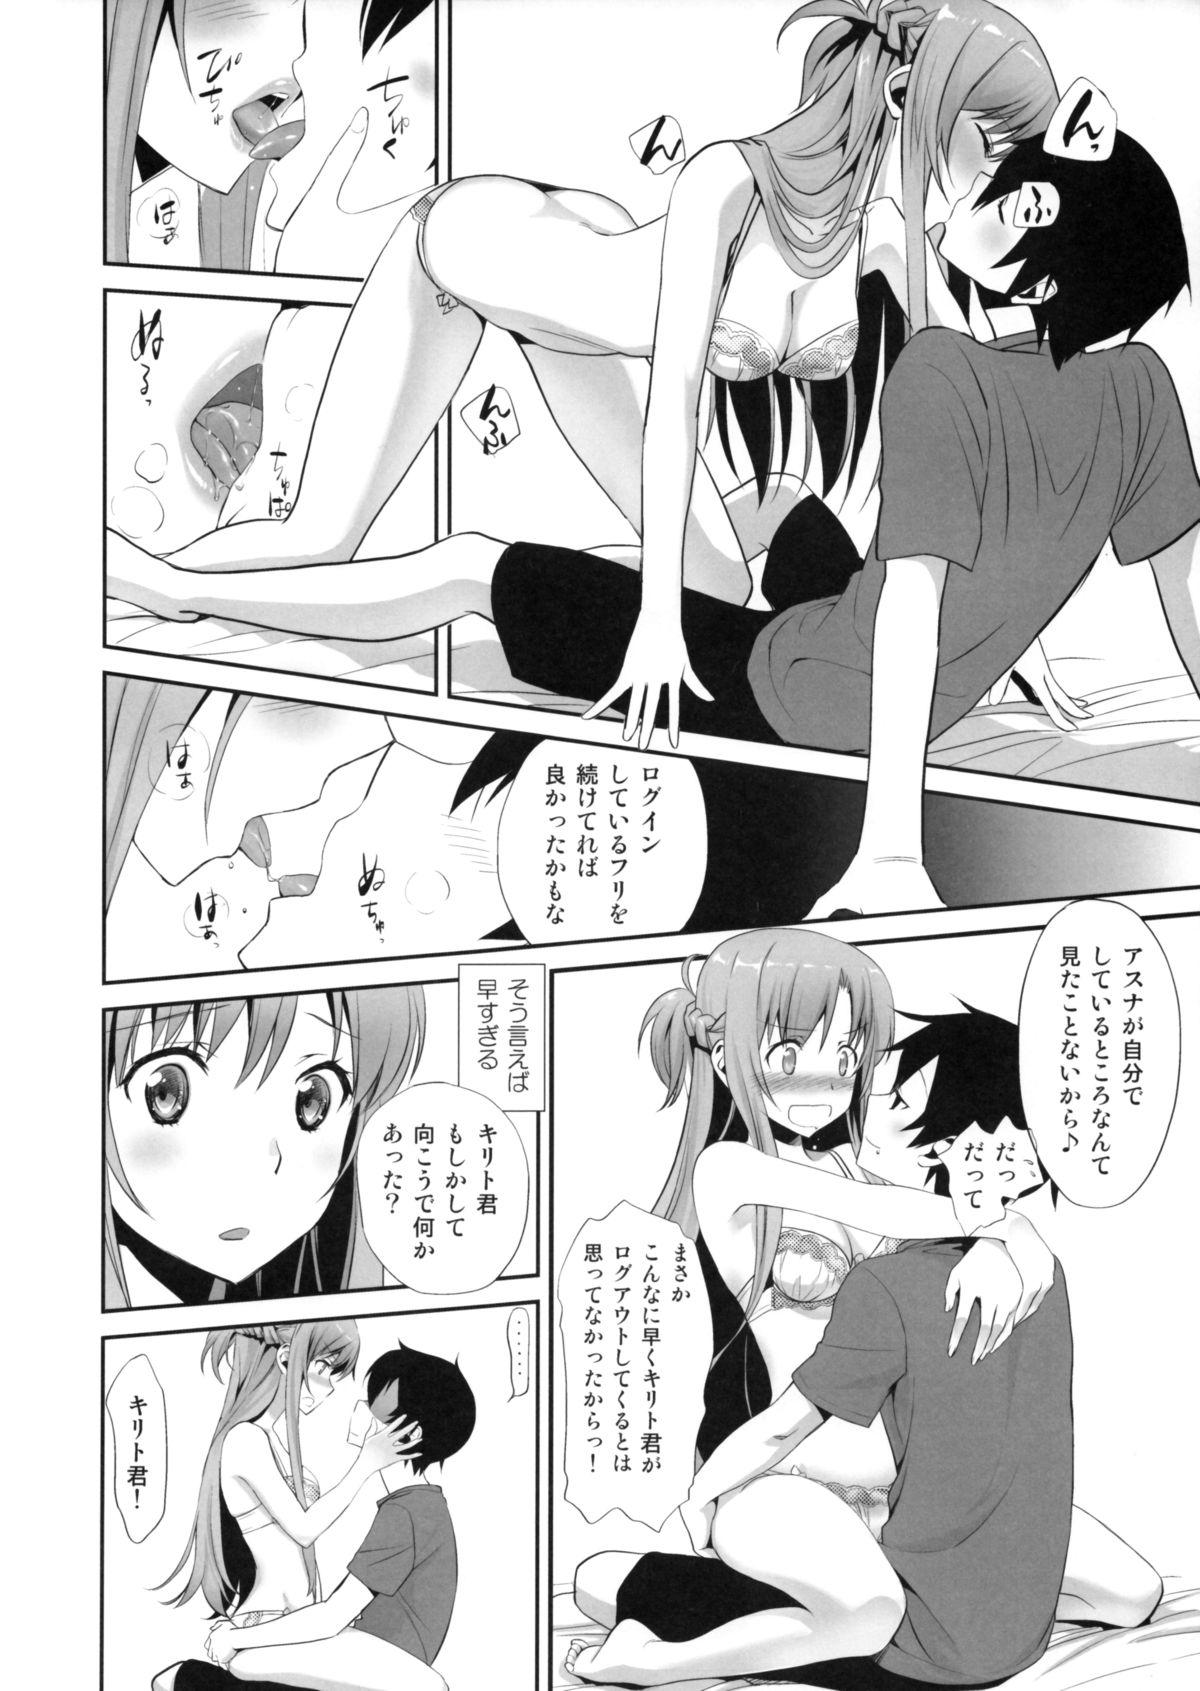 Action Sunny-side up? - Sword art online Latino - Page 11